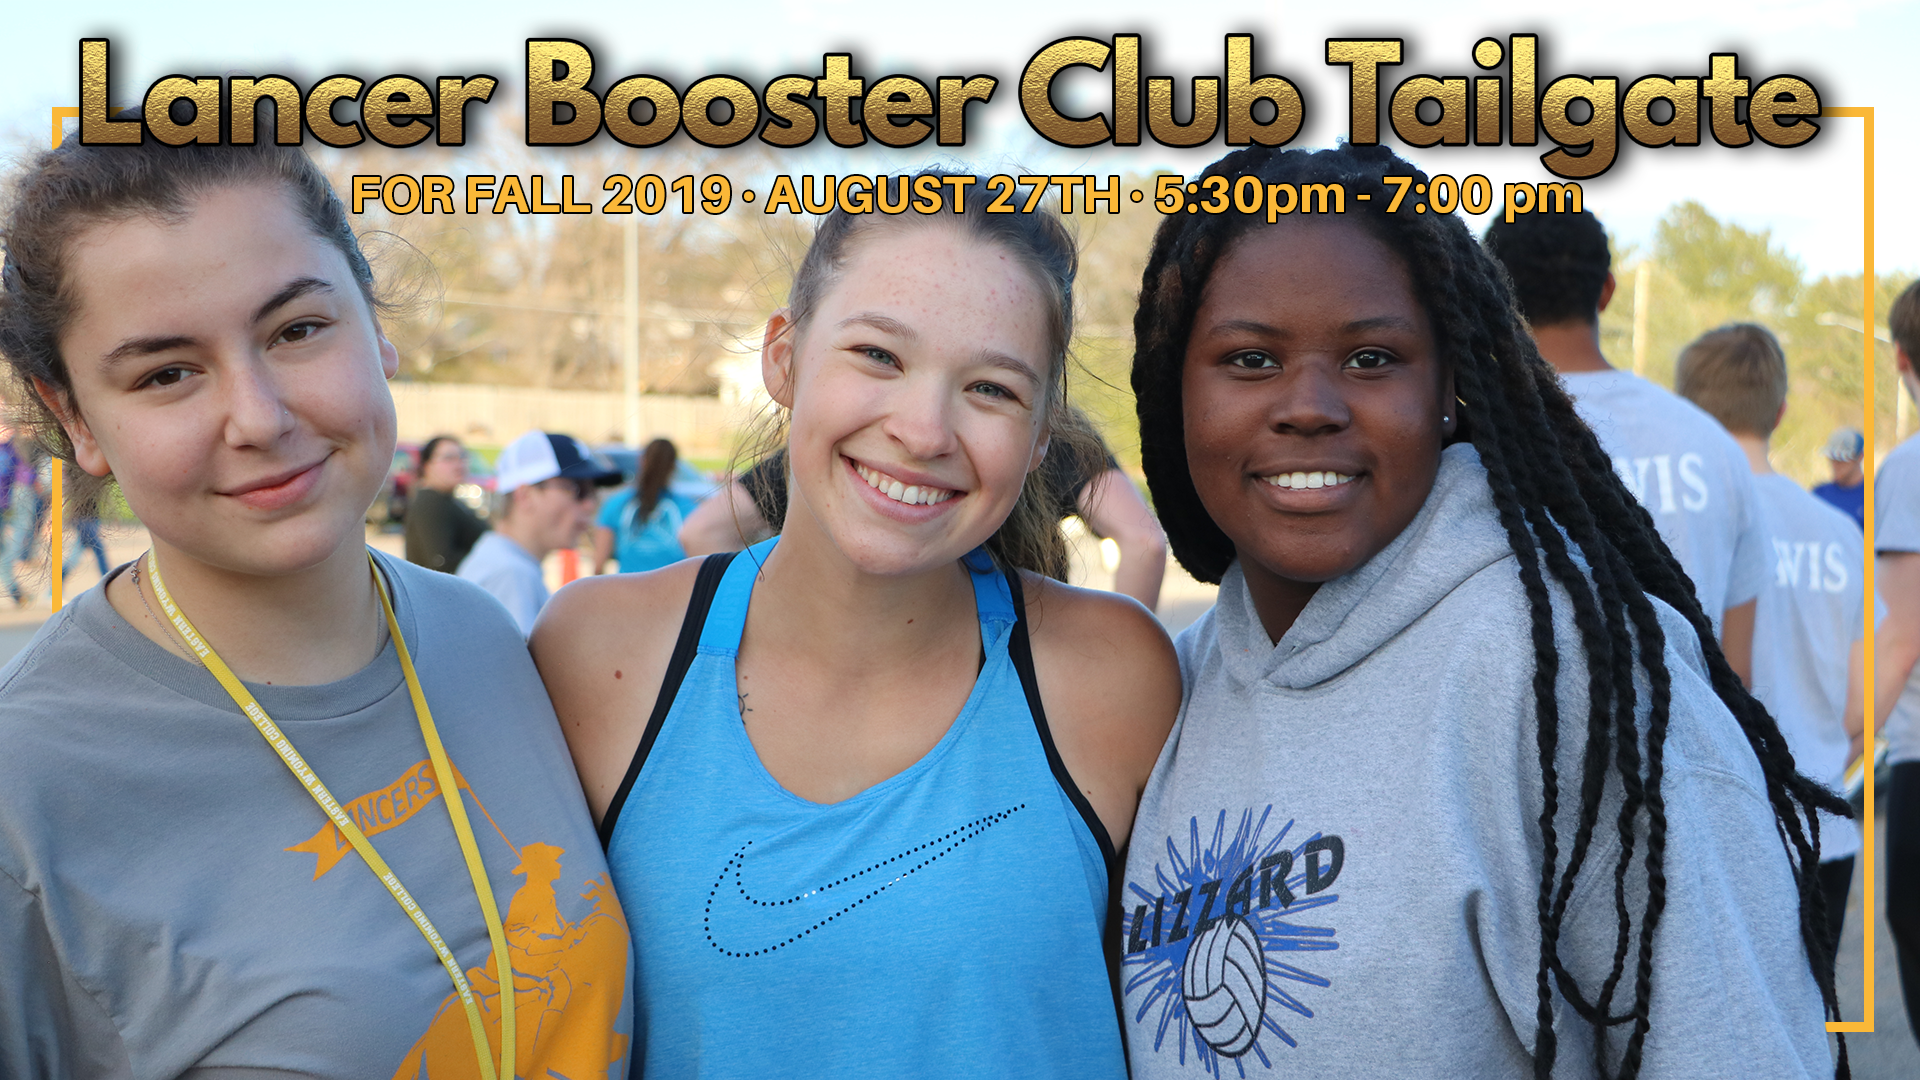 Lancer Booster Club Tailgate - August 27th - 5:30pm - 7:00pm